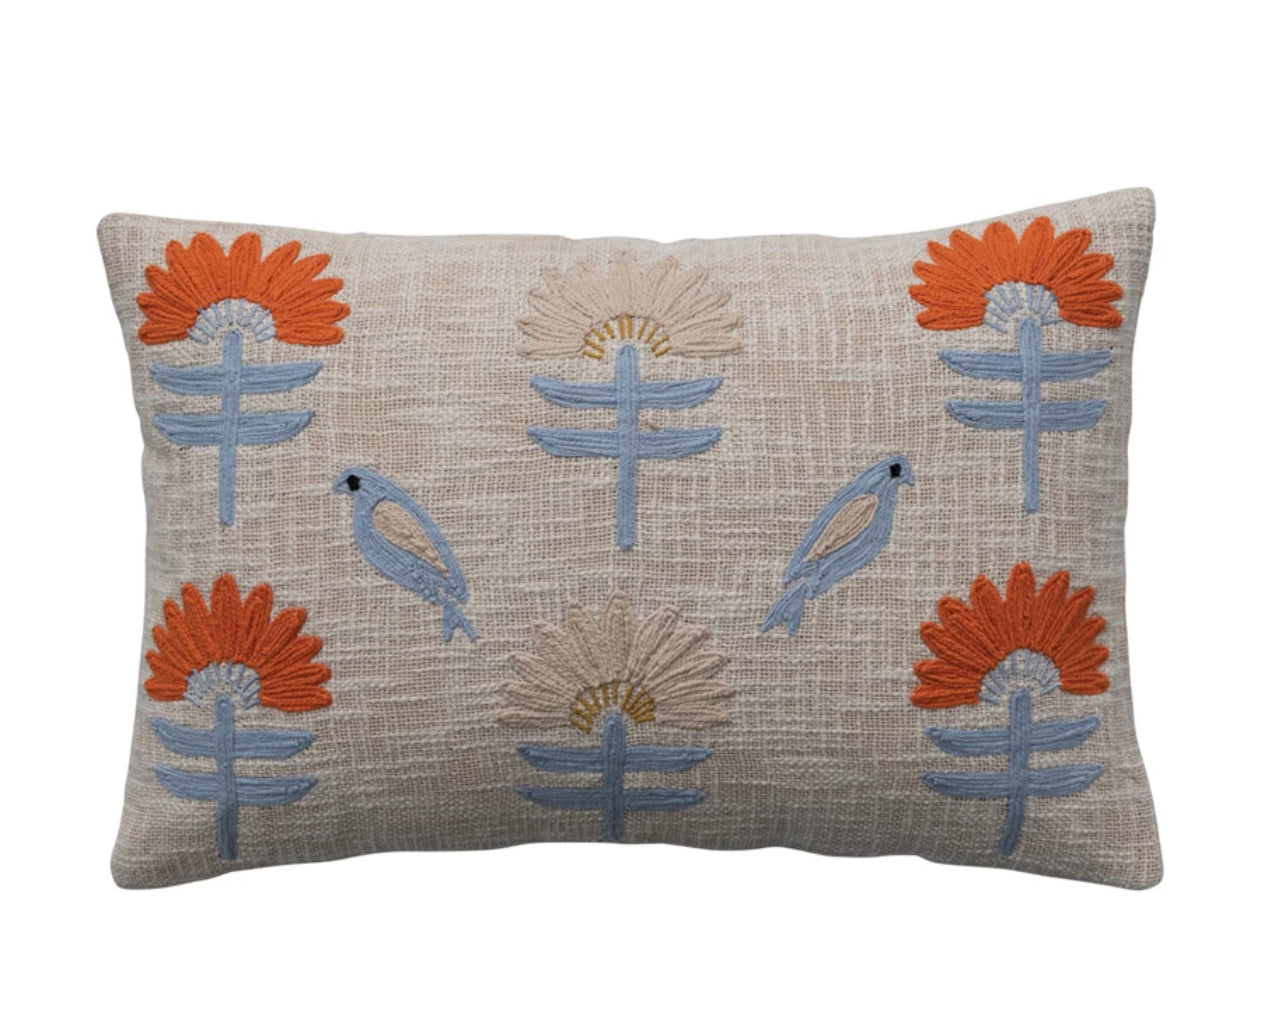 Woven Cotton Lumbar Pillow with Embroidered Flowers & Birds